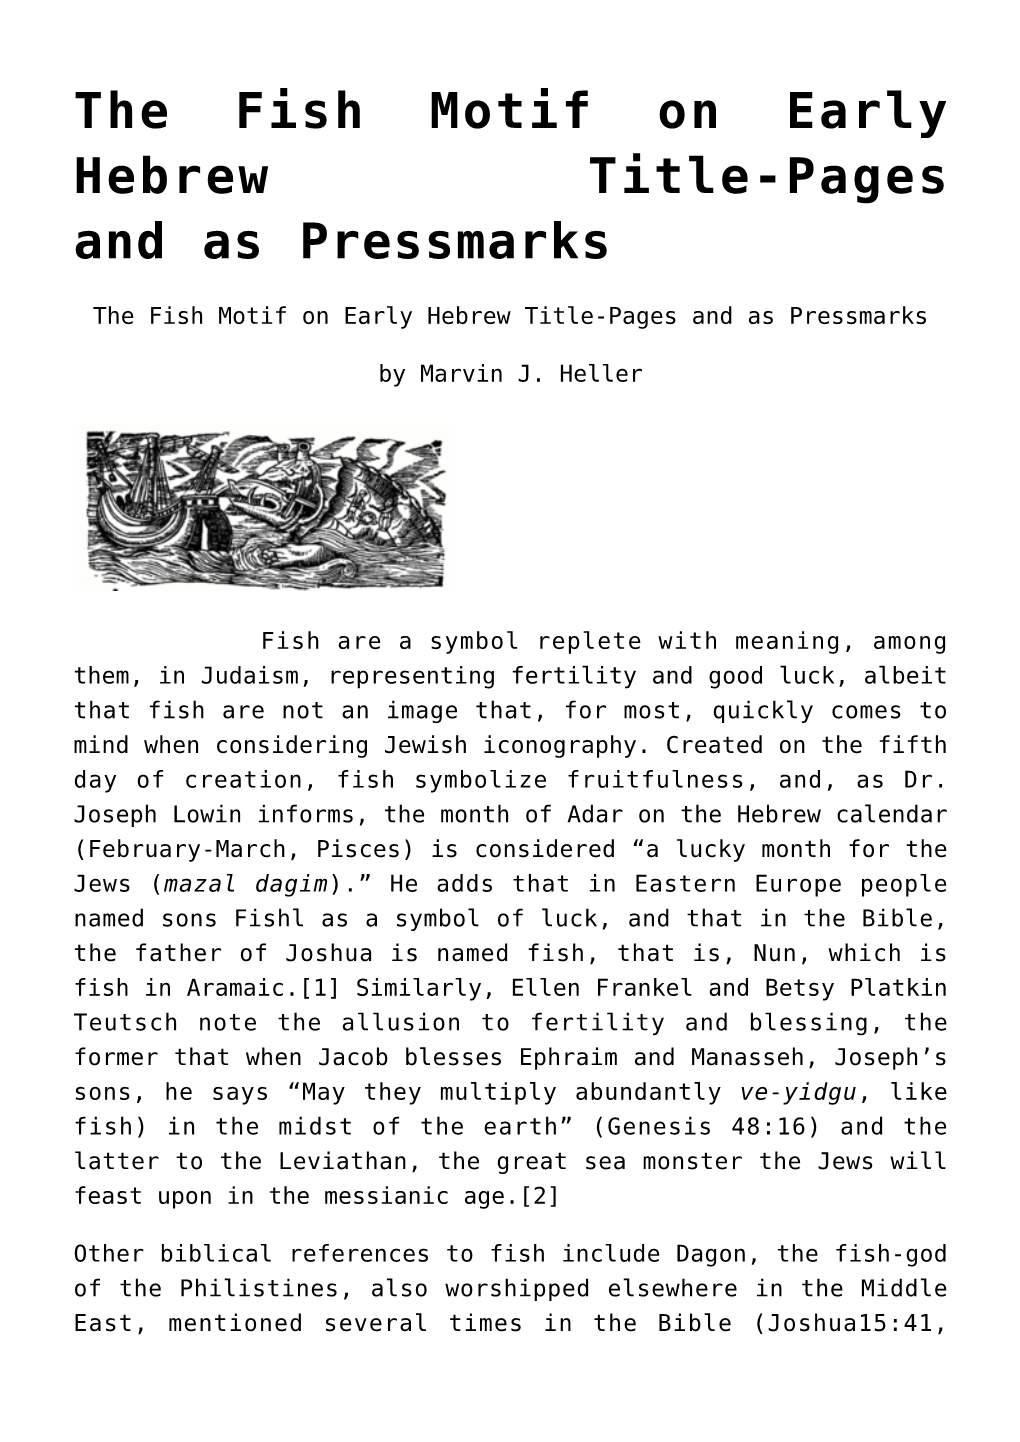 The Fish Motif on Early Hebrew Title-Pages and As Pressmarks